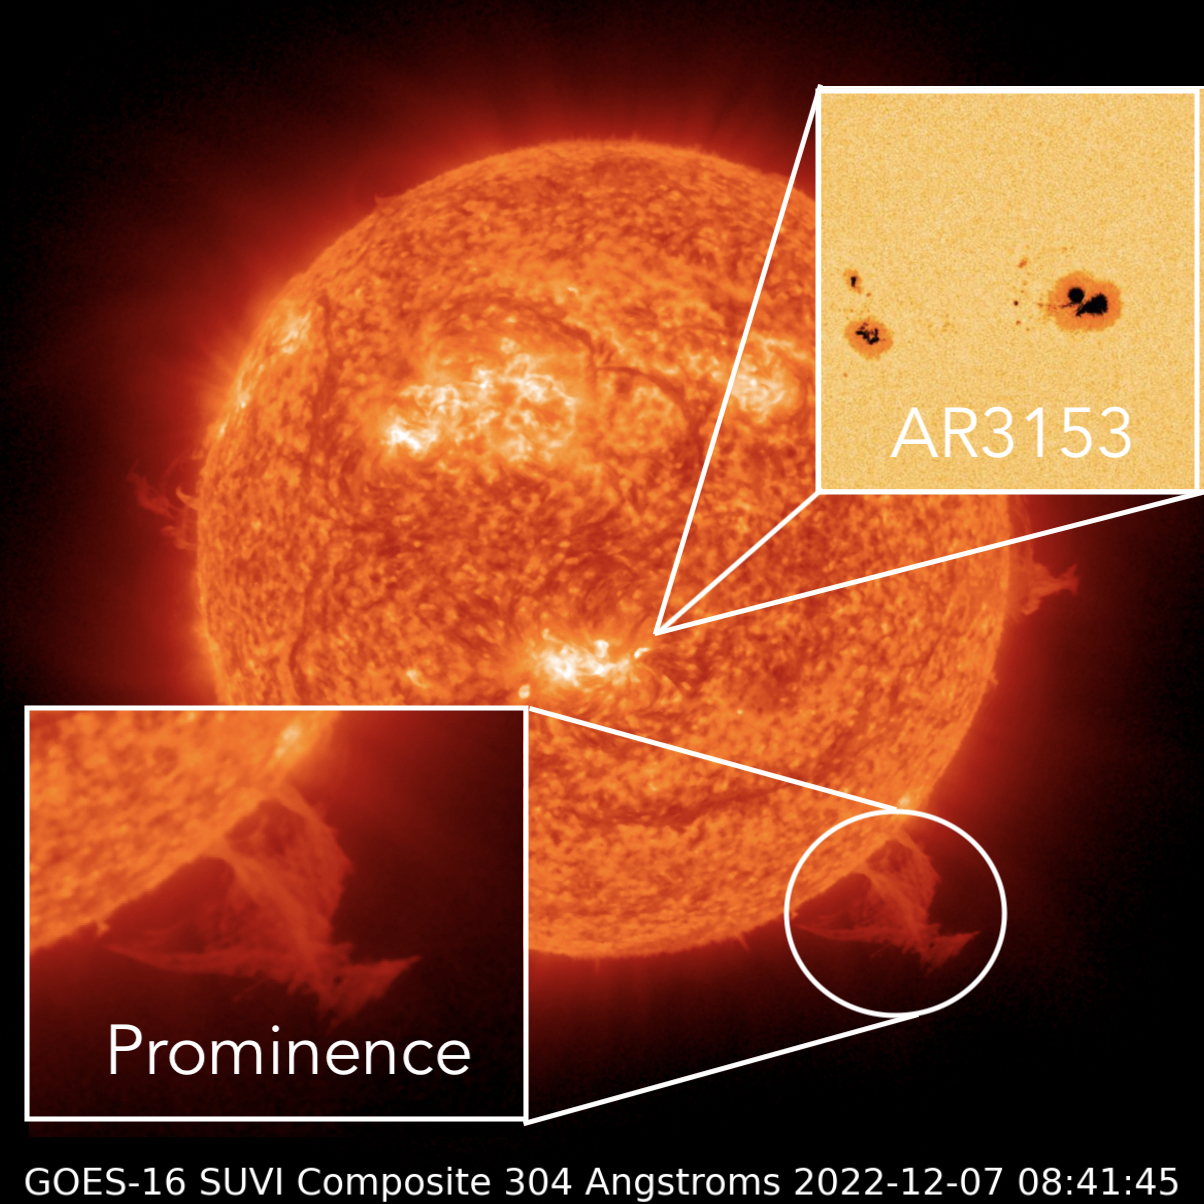  December 7, 2022 Composite of the sun showing a prominence and sunspot AR3153.